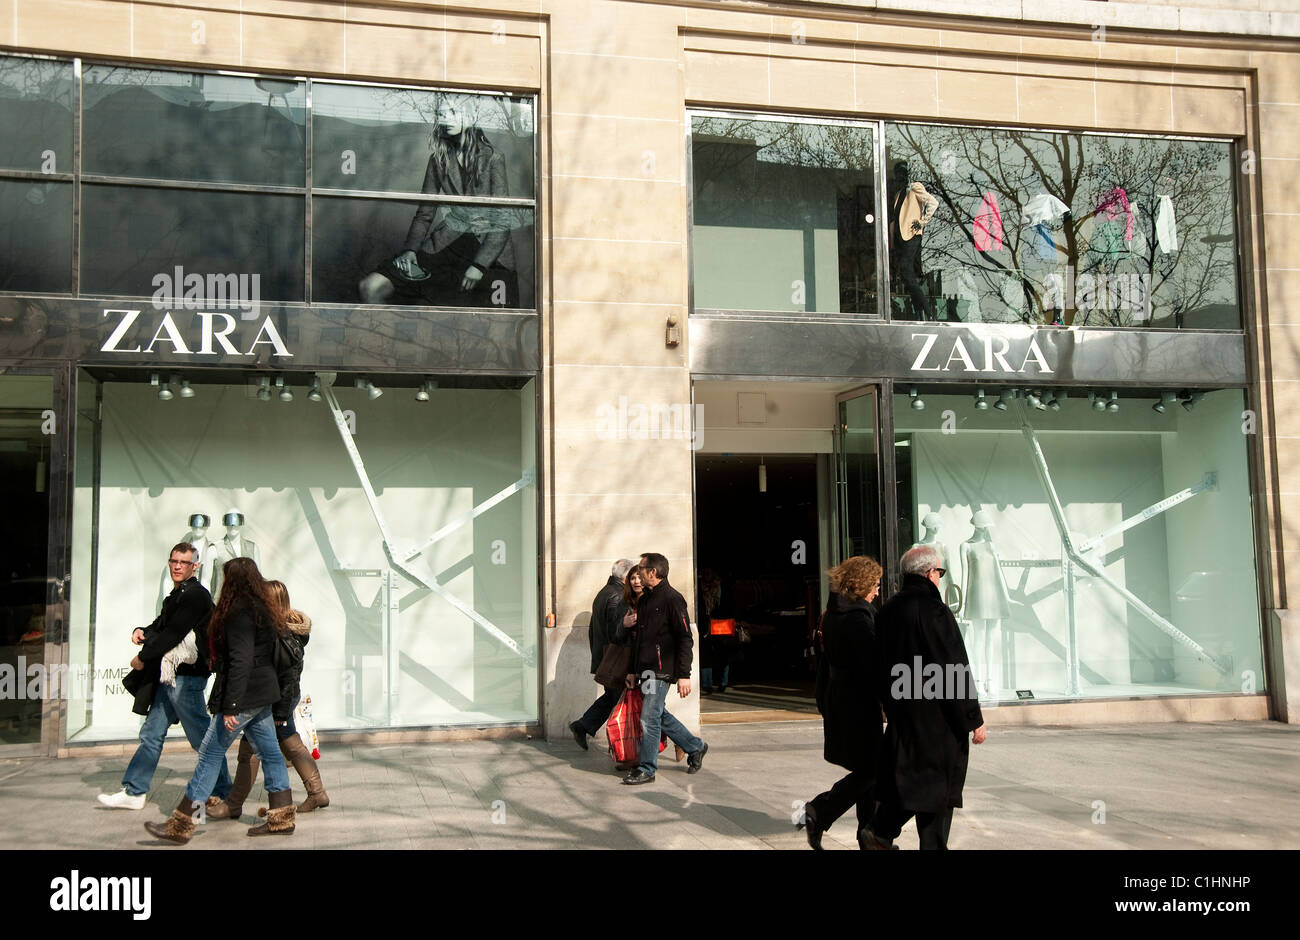 Paris France Zara High Resolution Stock Photography and Images - Alamy